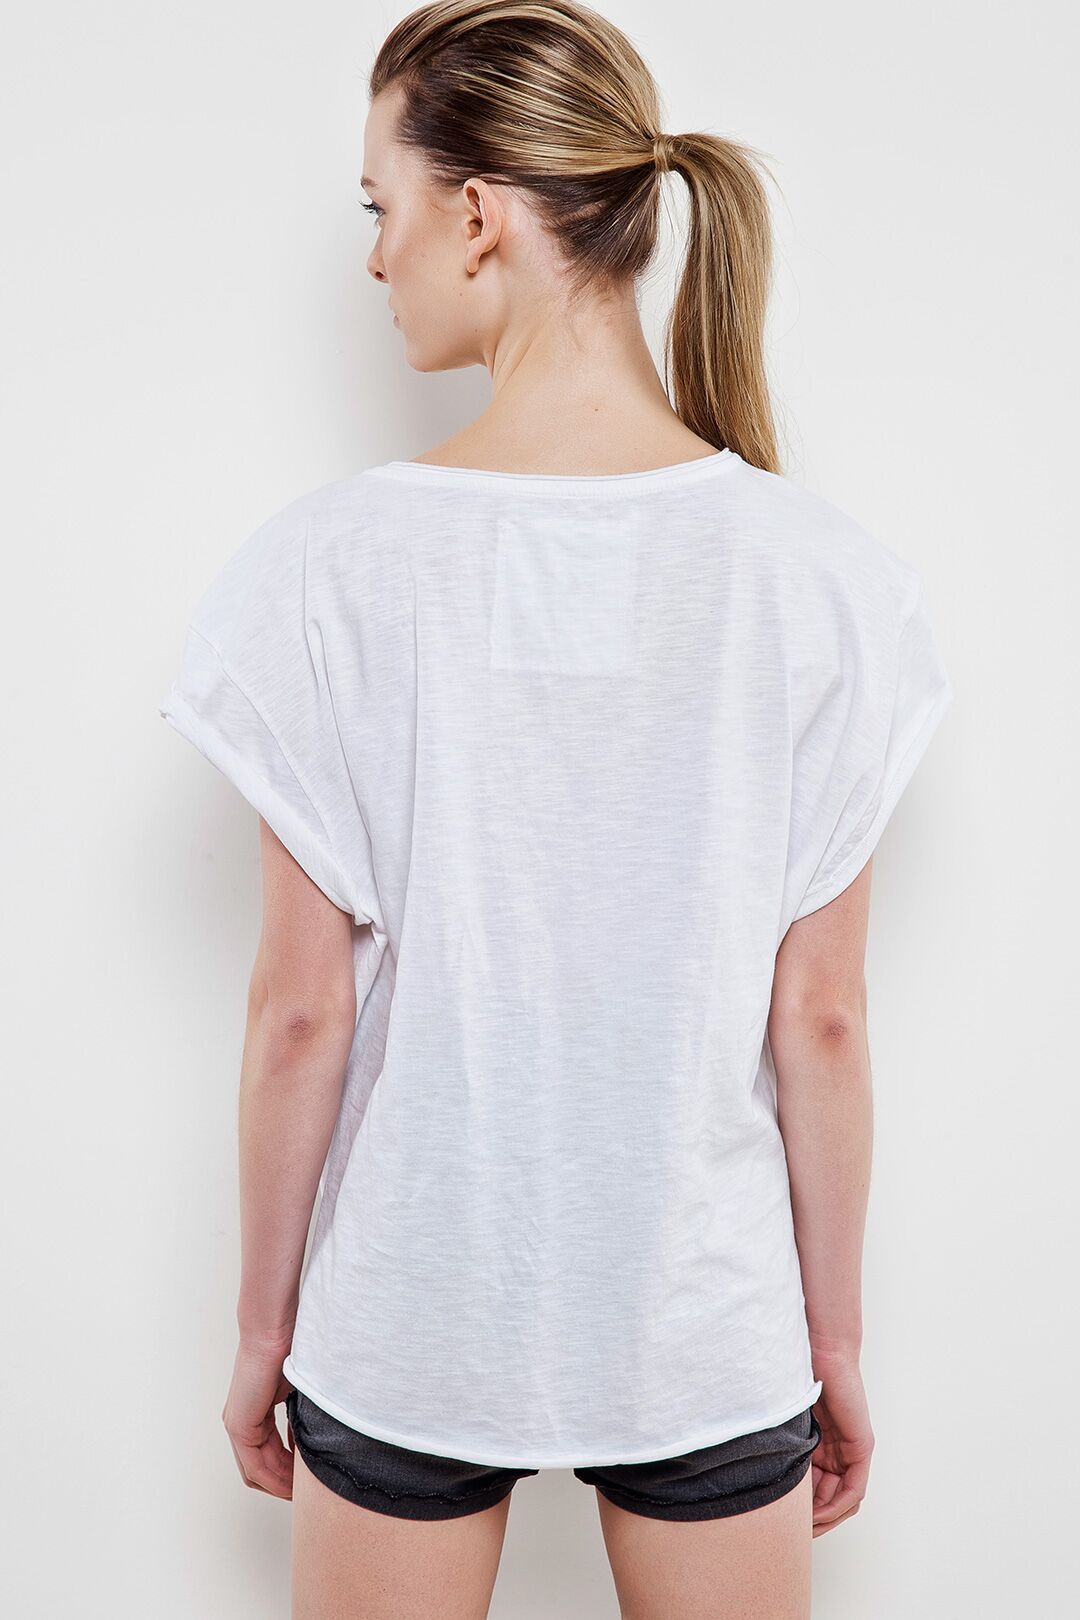 Nicolay Women's White T-Shirt - The Clothing LoungeDear Deer